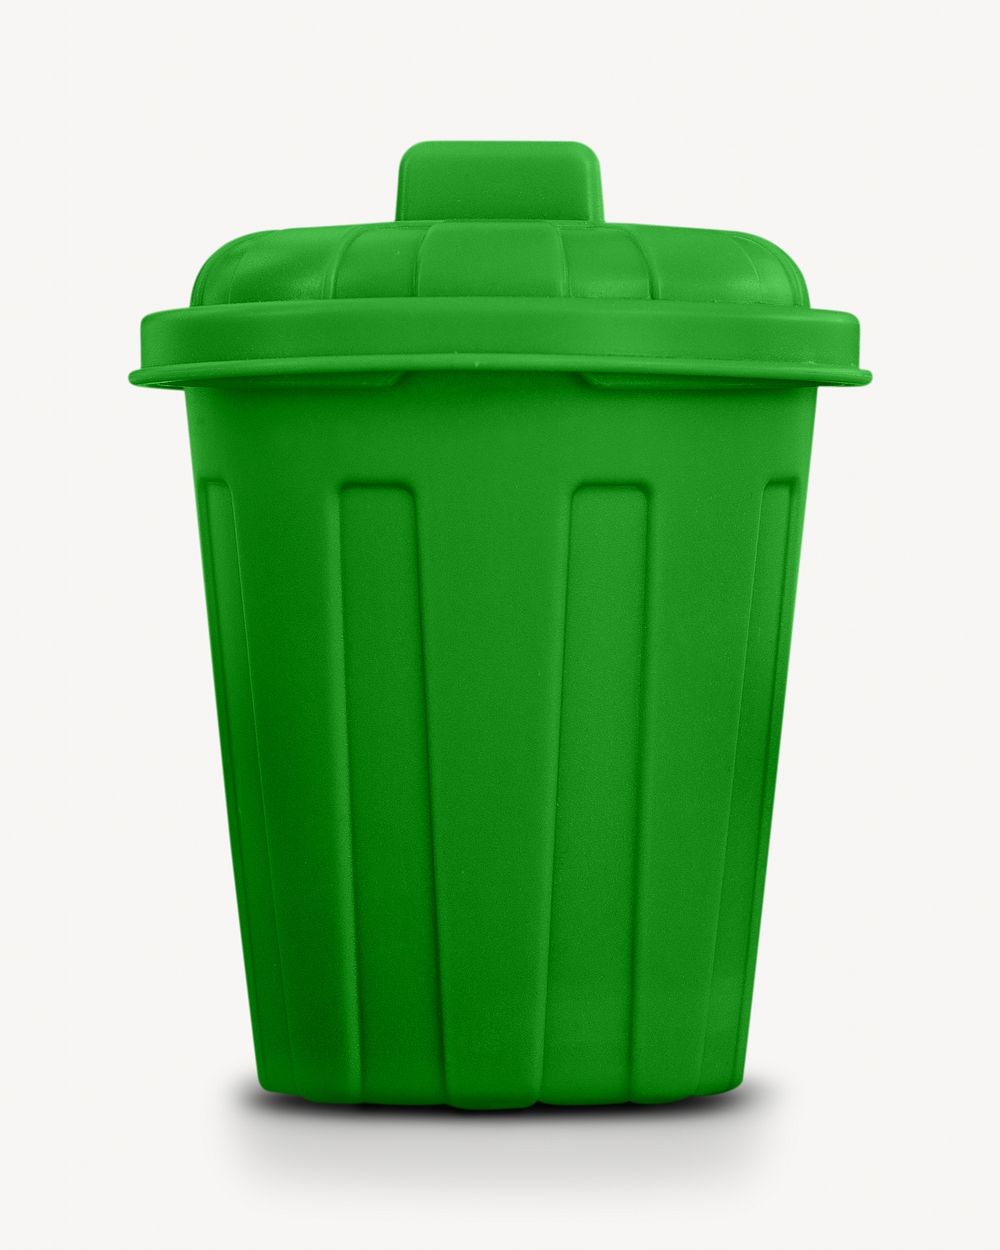 Green garbage bin, isolated object on white